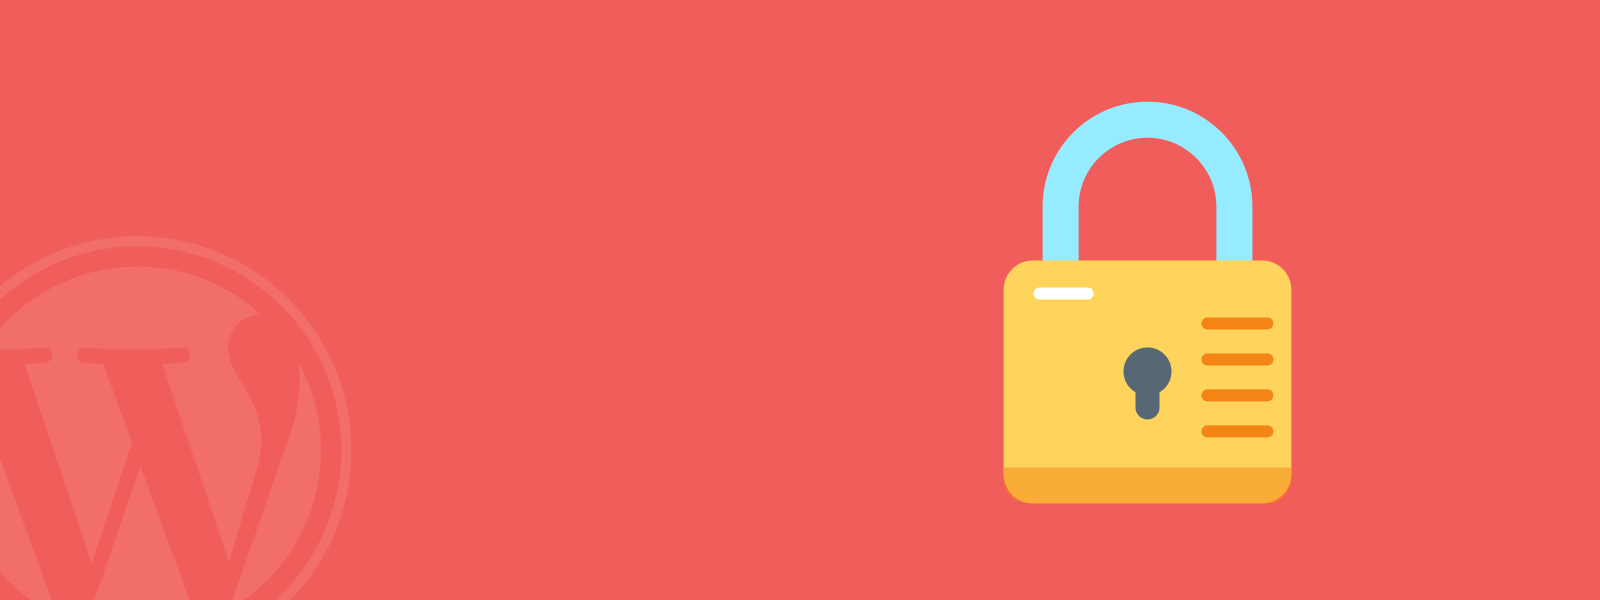 5 WordPress Security Measures Every Site Needs To Have